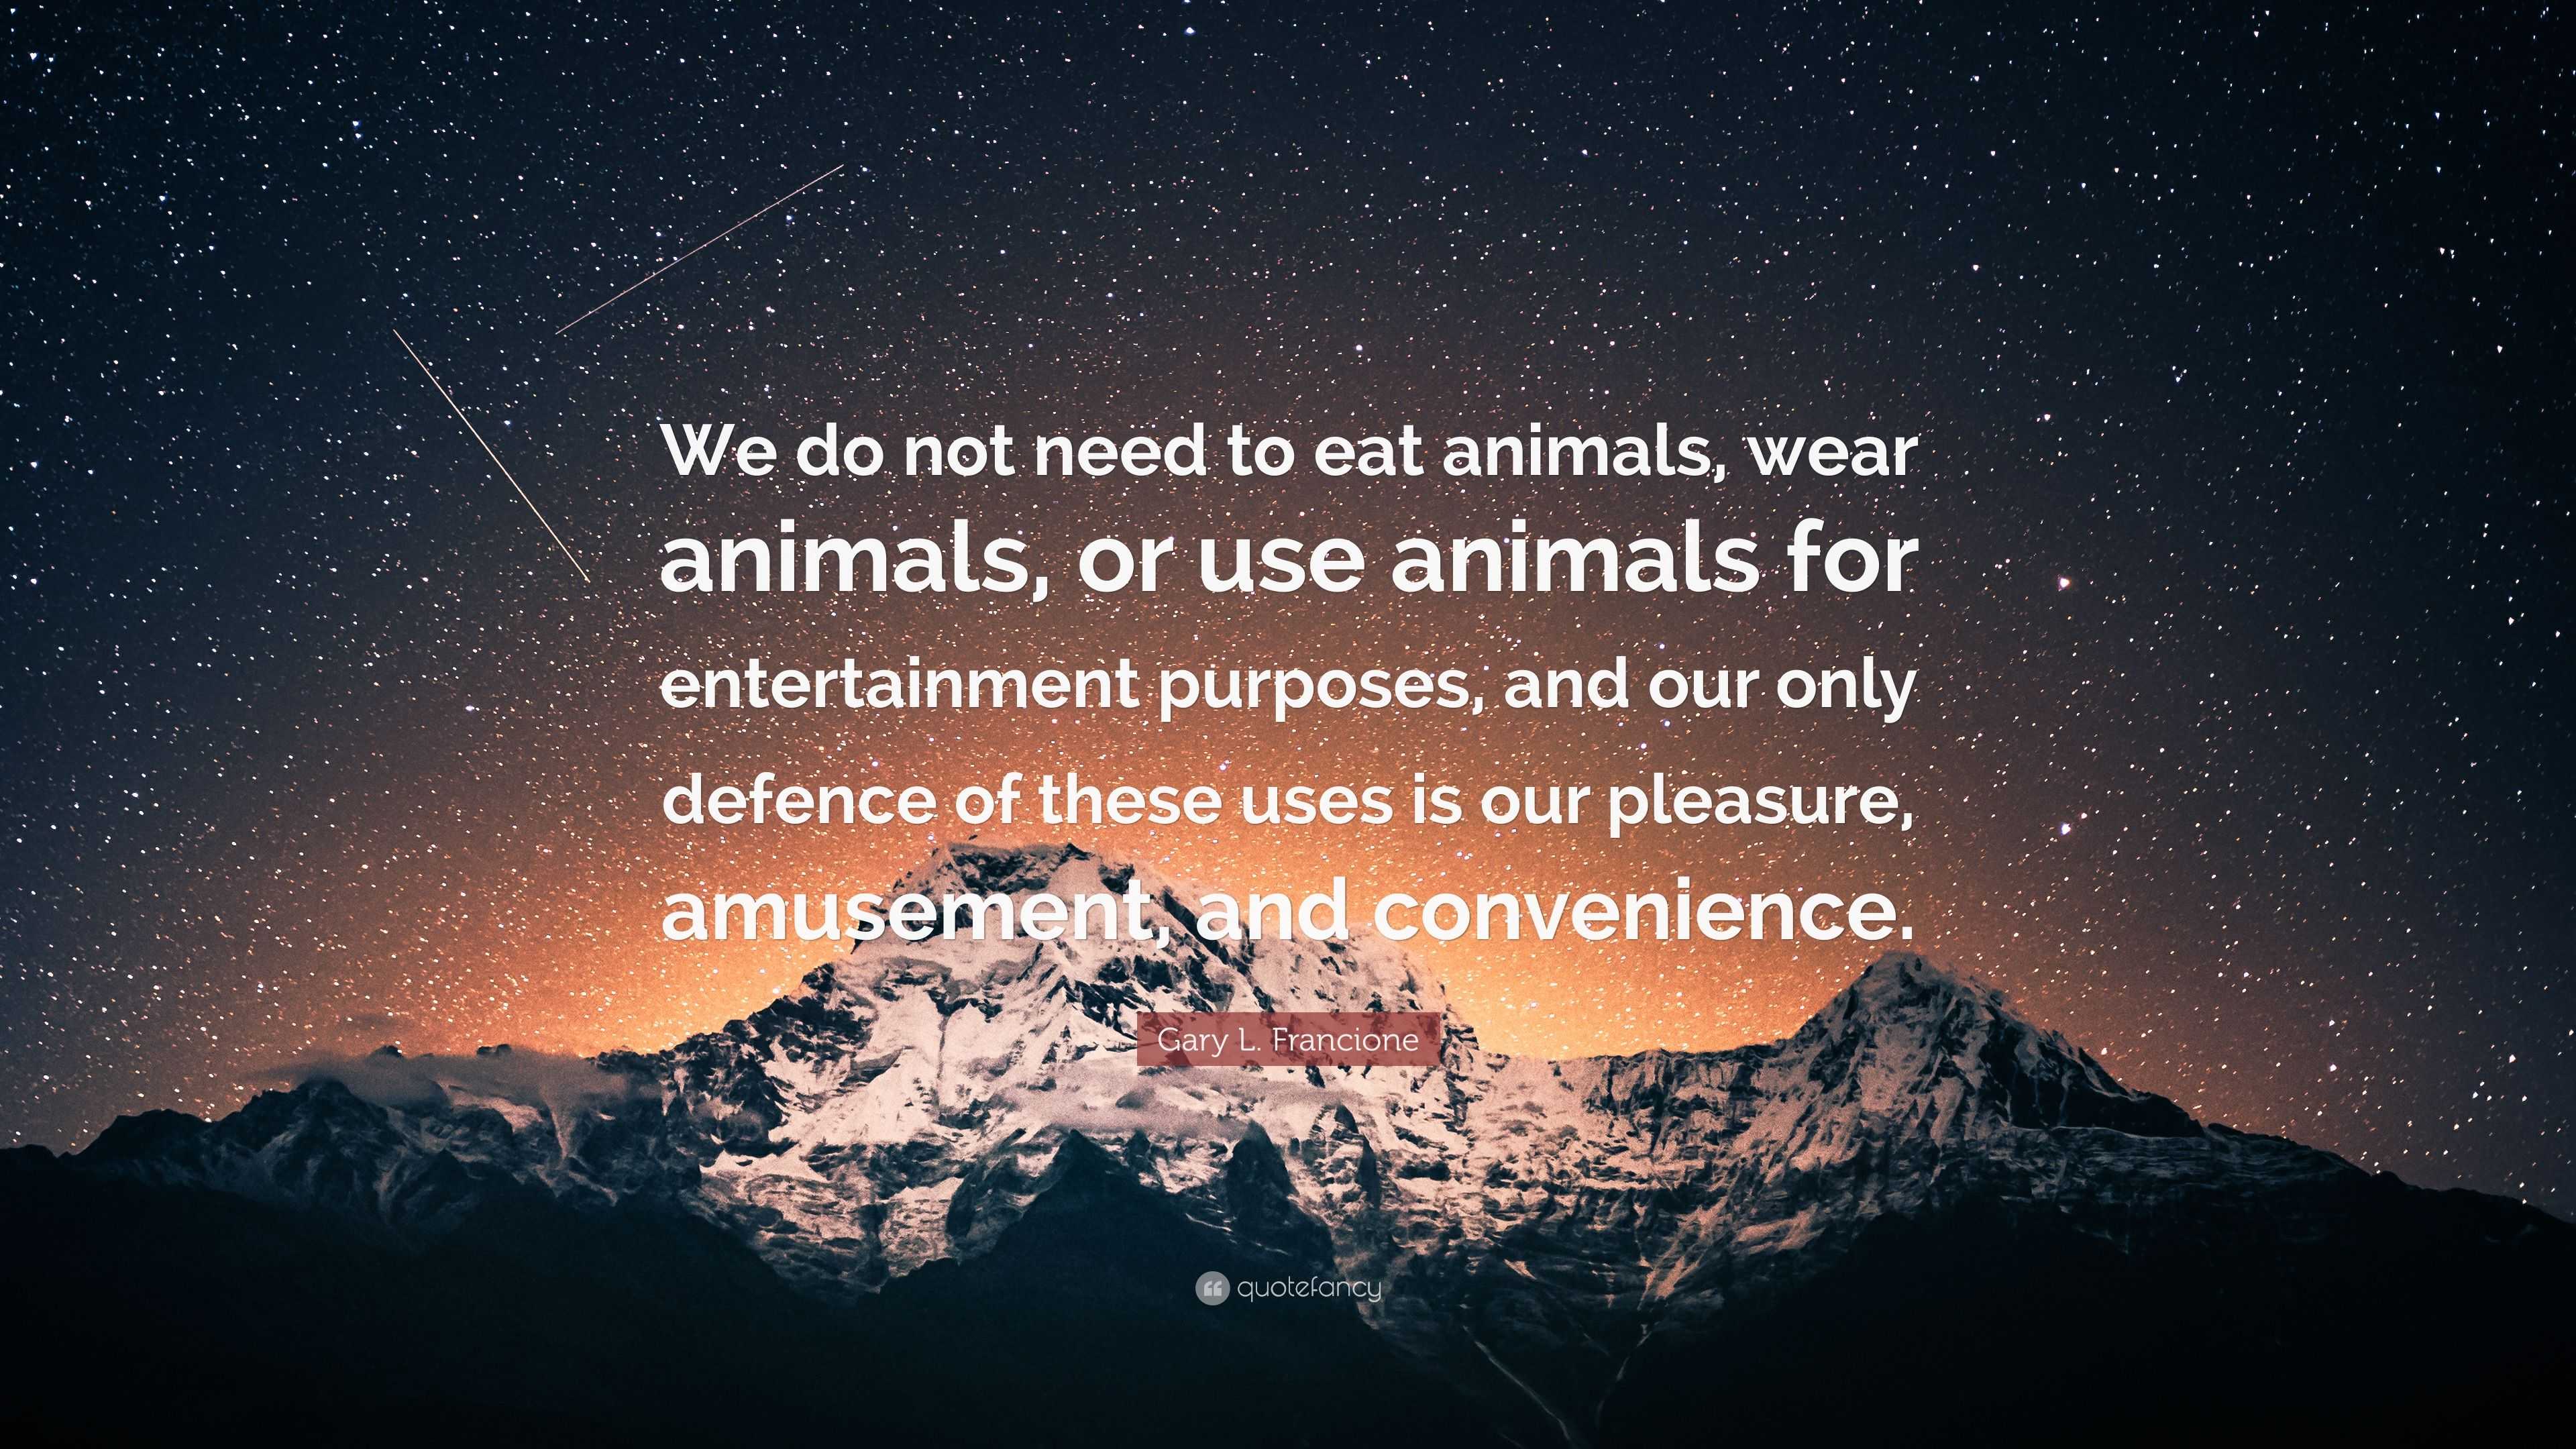 Gary L. Francione Quote: “We do not need to eat animals, wear animals, or  use animals for entertainment purposes, and our only defence of these us...”